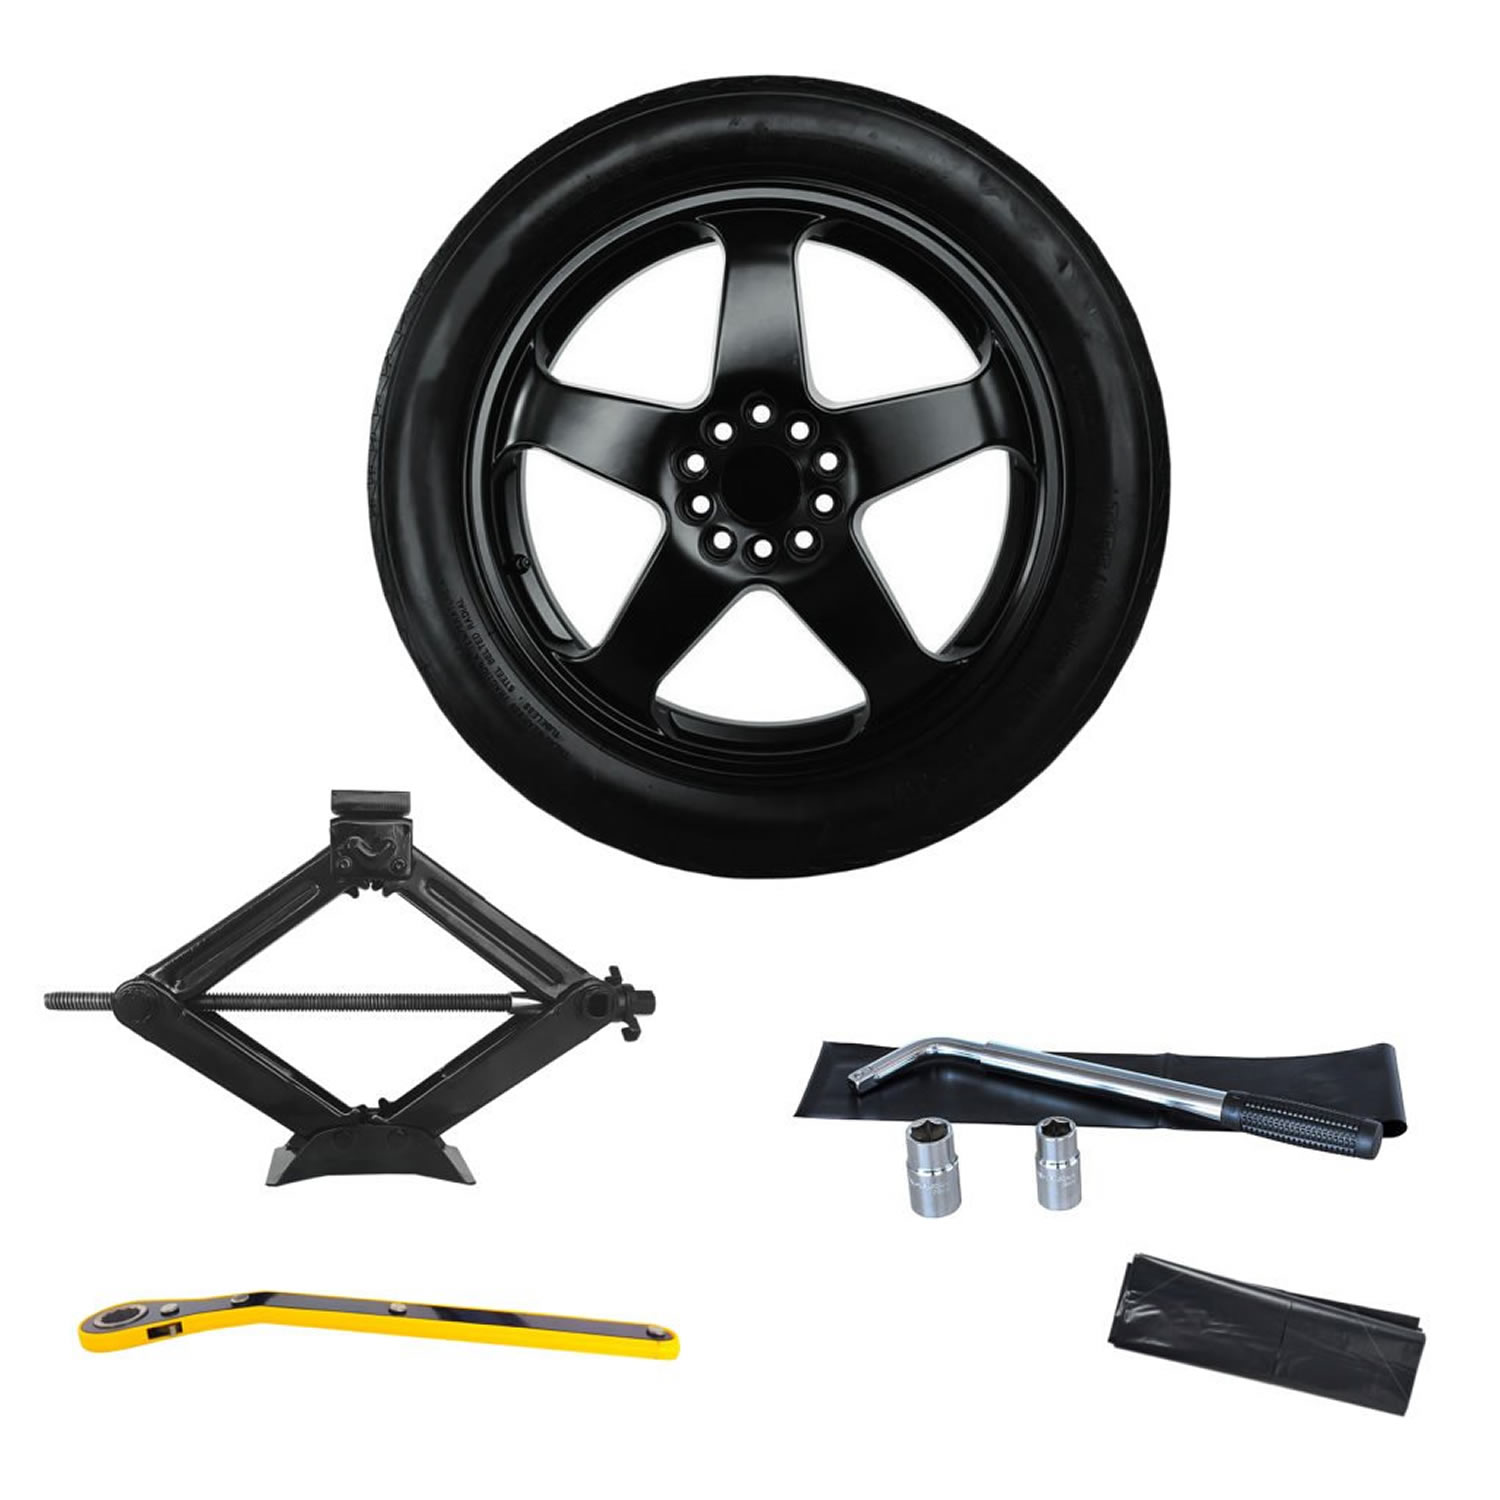 Modern Spare Review: Tire & Tools